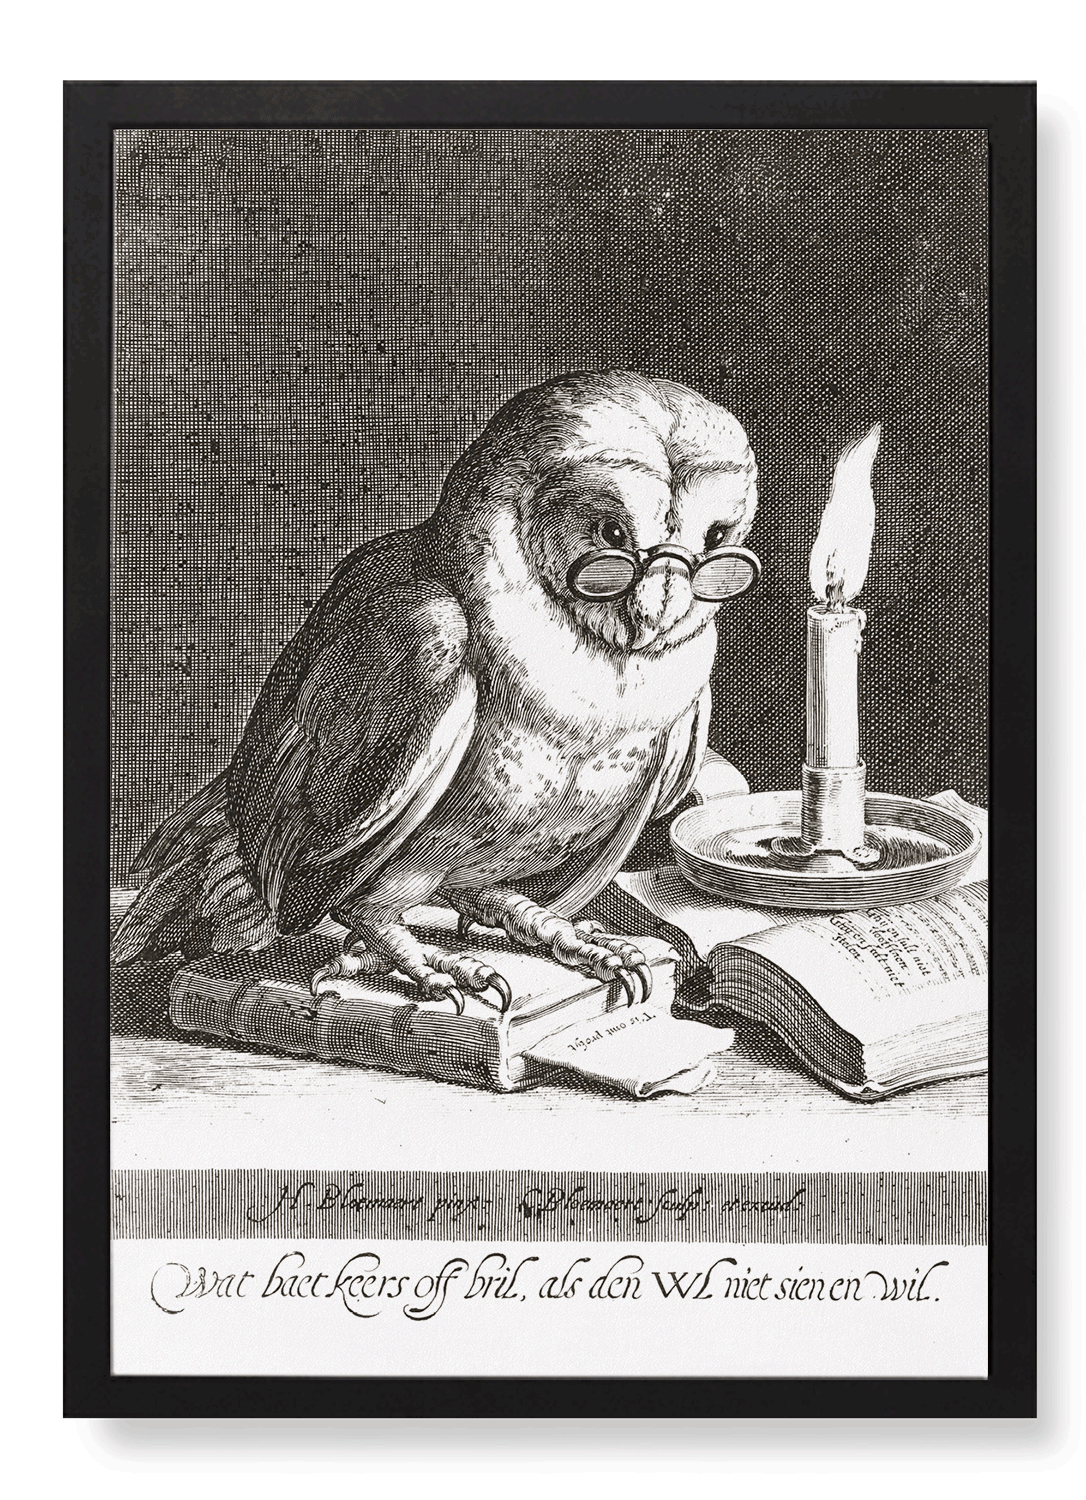 WISE OWL (1625)